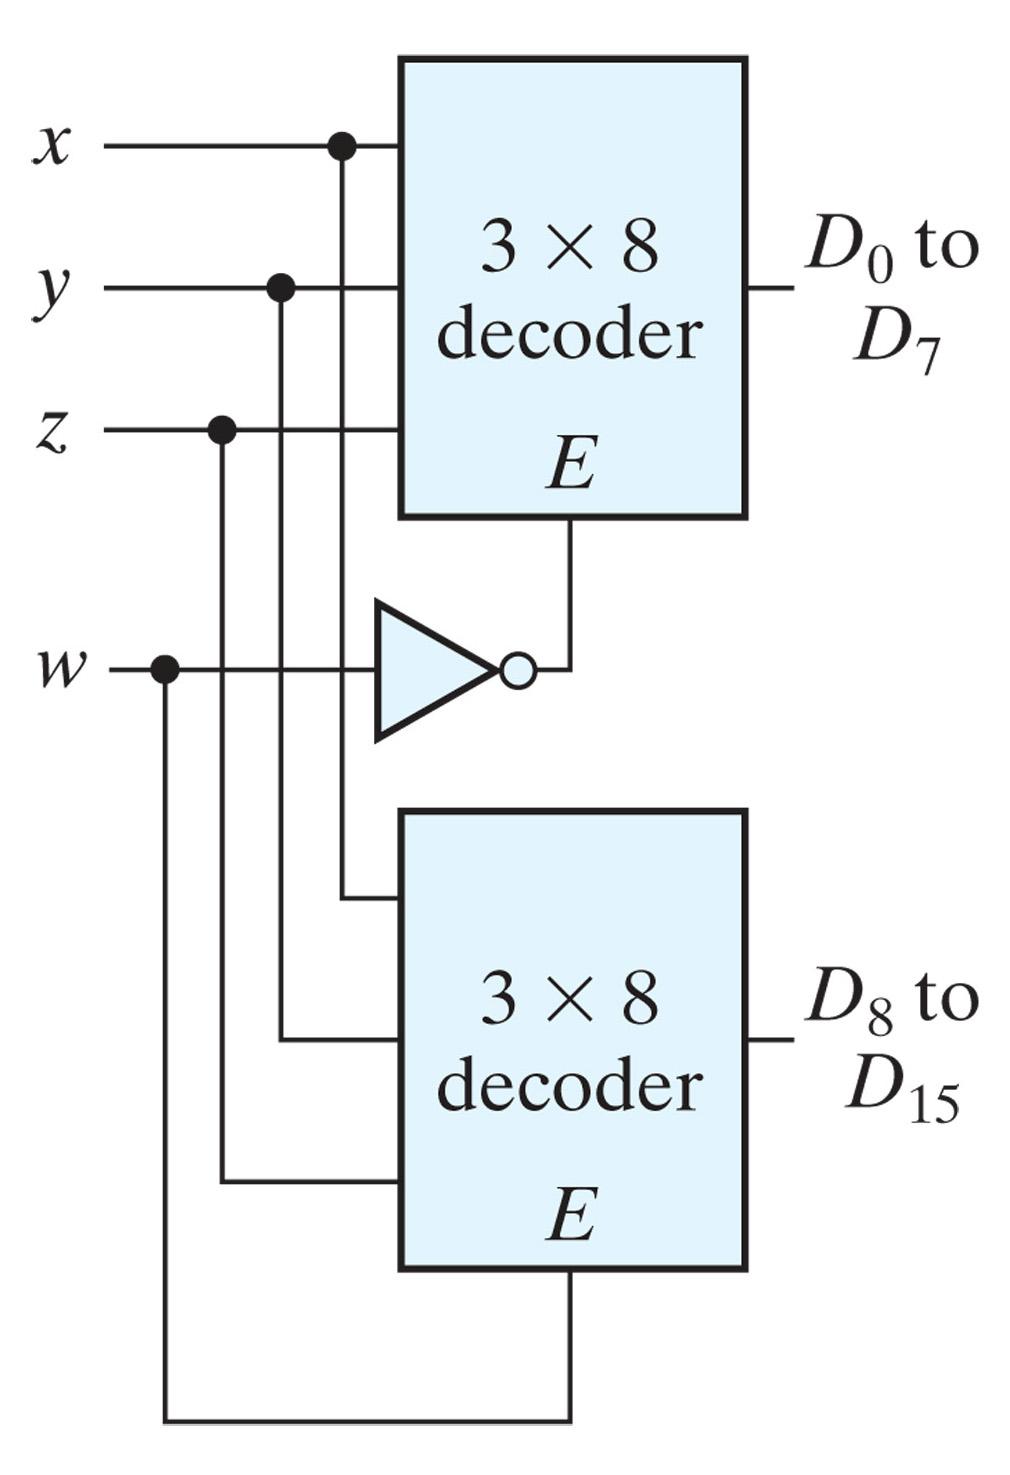 Decoders Decoders with enable inputs can be connected together to form a larger decoder circuit Two 3-to-8-line decoders (w/ enable) form a 4-to-16-line decoder When w=0, the top decoder is enabled